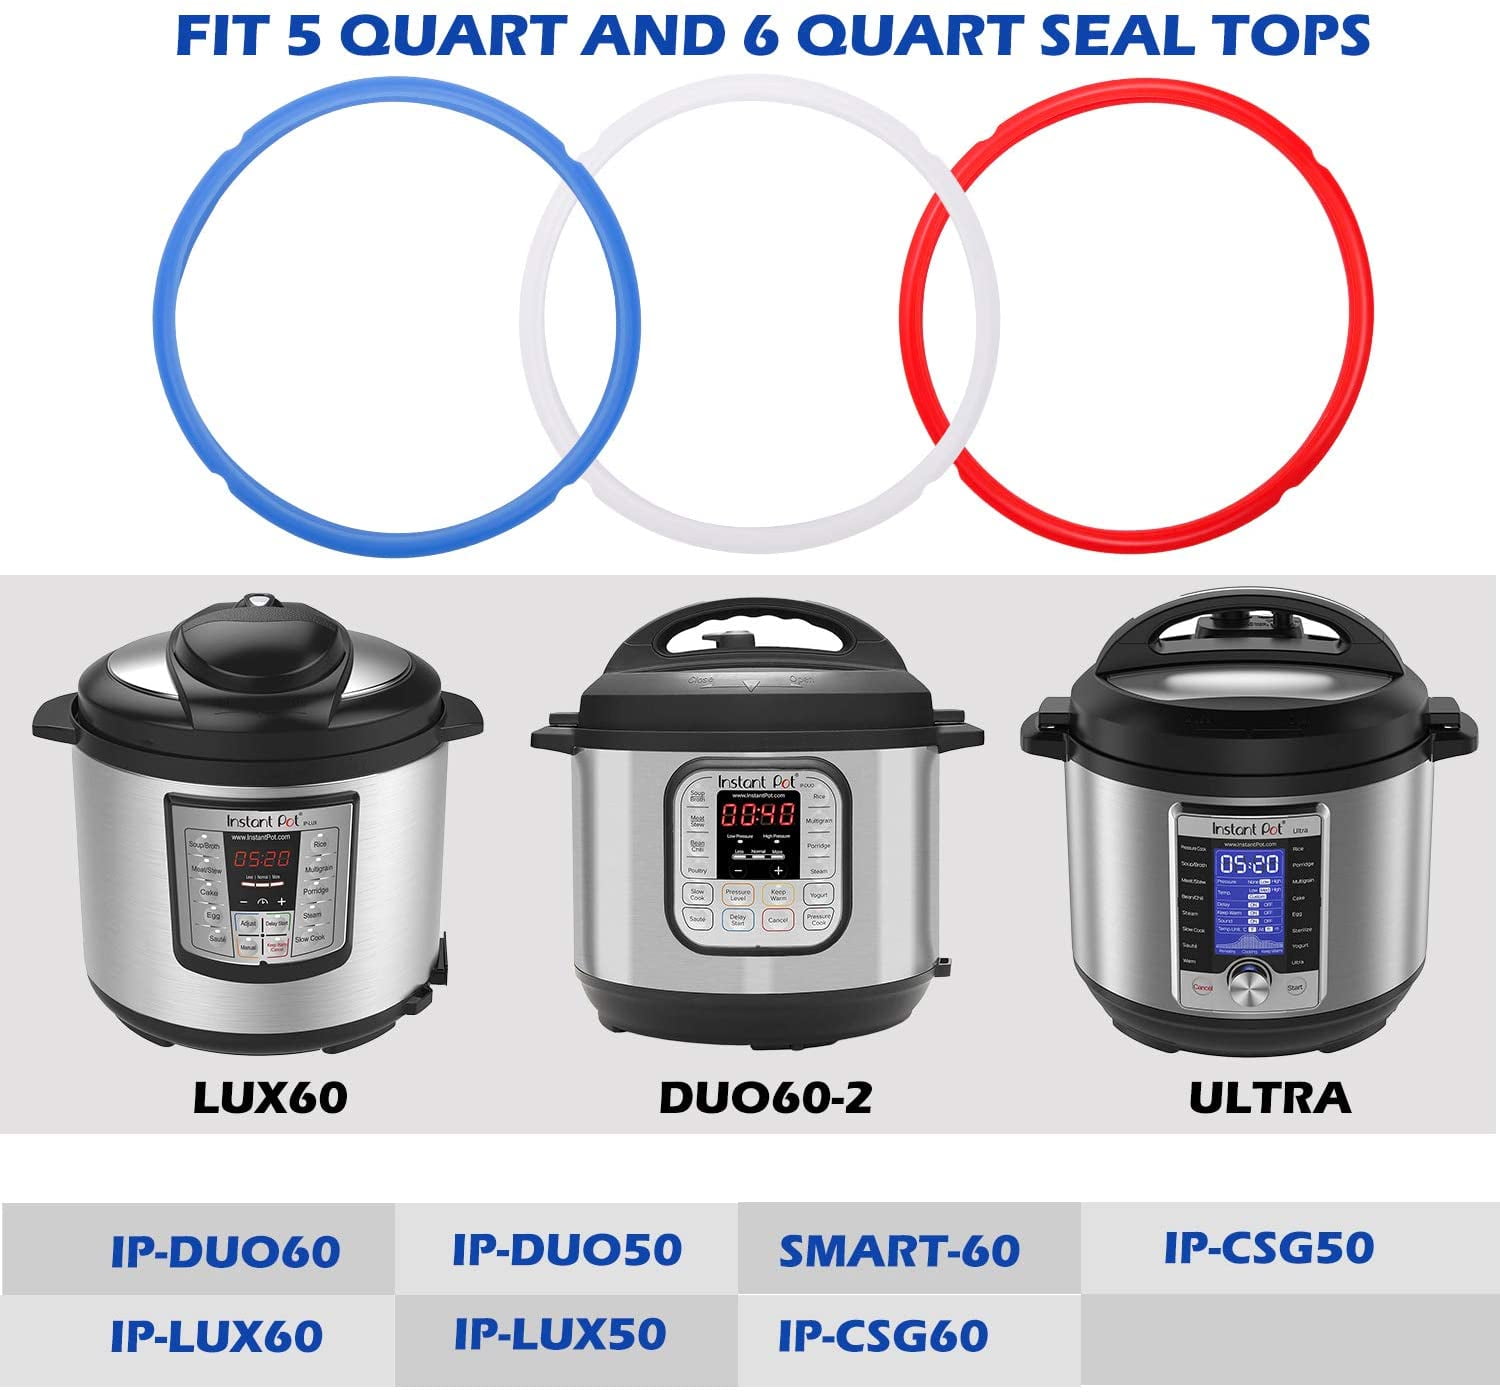 Dropship 1pc Silicone Sealing Ring For Instant Pot; 3 Quart; 5 & 6